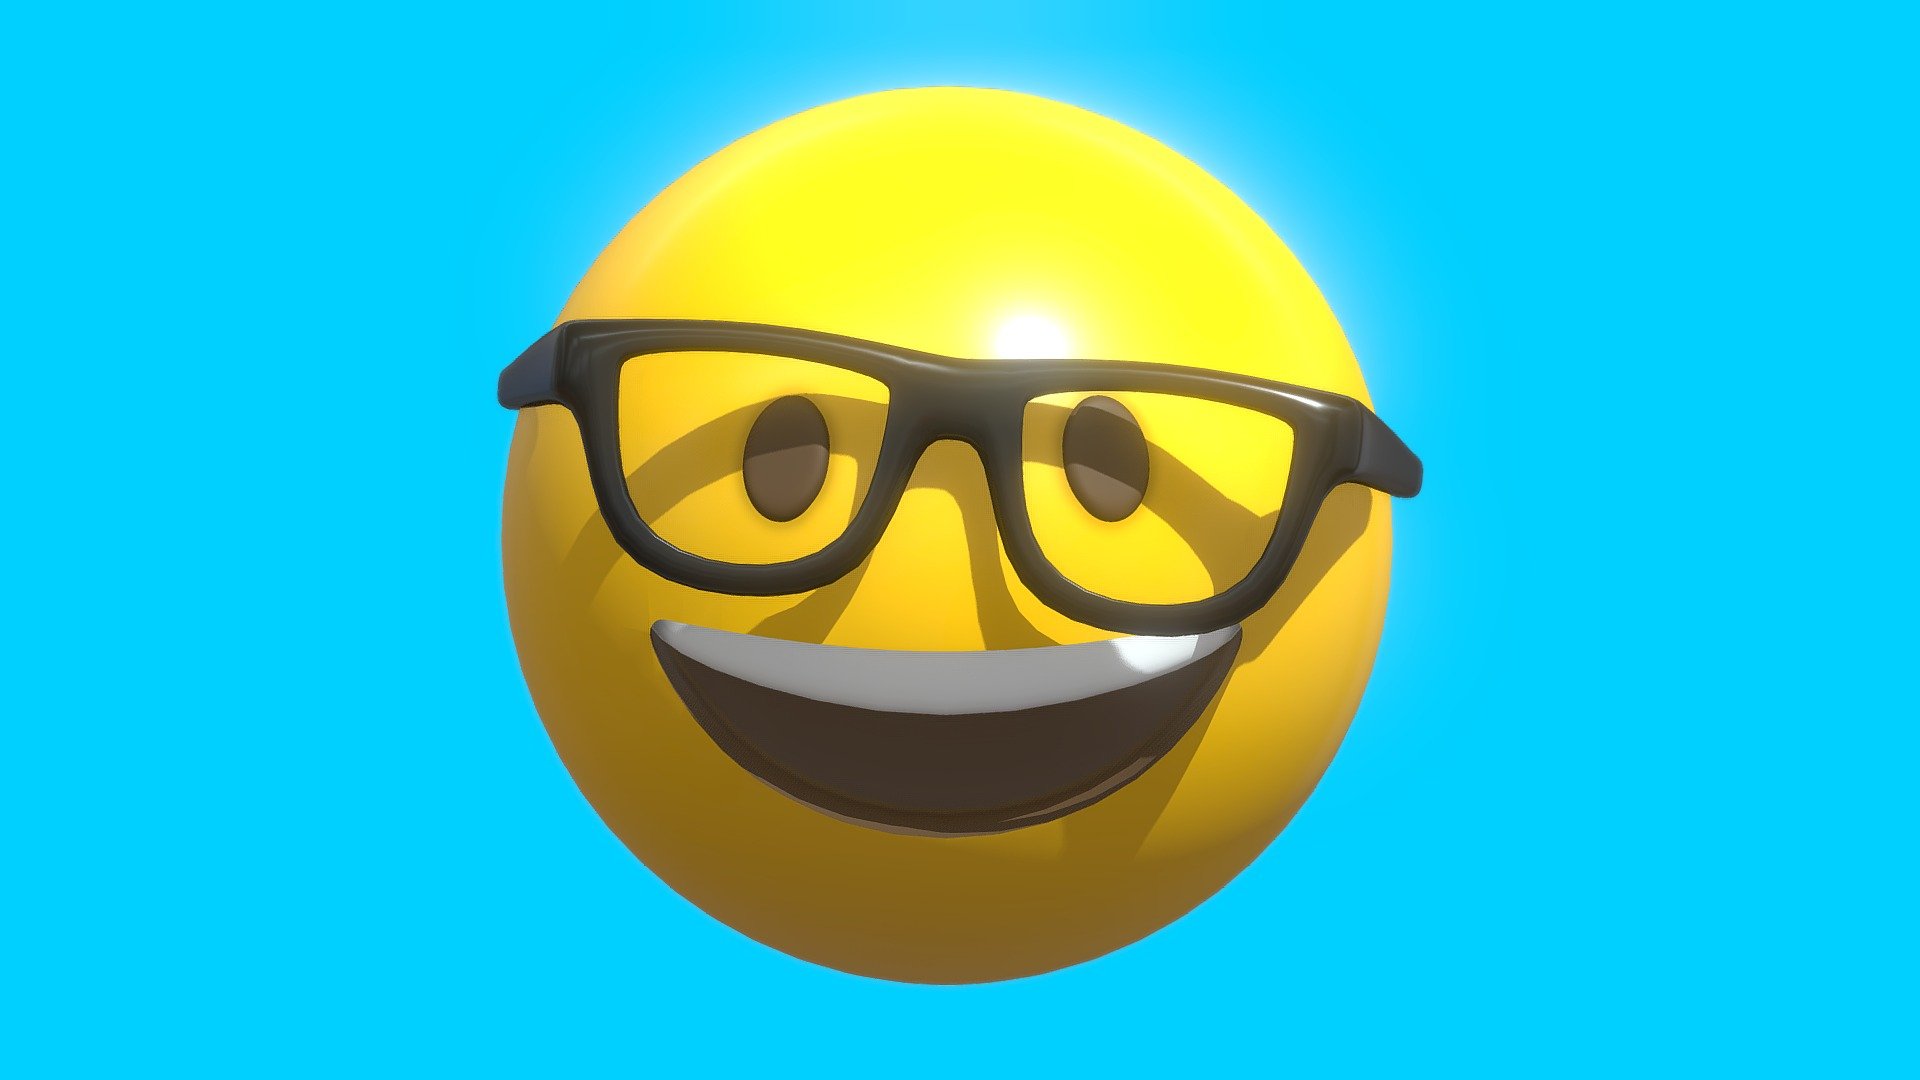 Nerd Glasses Face Emoticon Emoji or Smiley 3D Model Made in Blender 4.0

This model does include a TEXTURE, DIFFUSE, and ROUGHNESS MAP, but if you want to change the color you can change it in the blend file, just use the principled bsdf and play with the rough and base color parameter

in the blender file i just included the Model with the Subdivide Modifier and Base Material but Different UV Map - Nerd Glasses Face Emoticon Emoji or Smiley - Buy Royalty Free 3D model by pakyucangkun 3d model